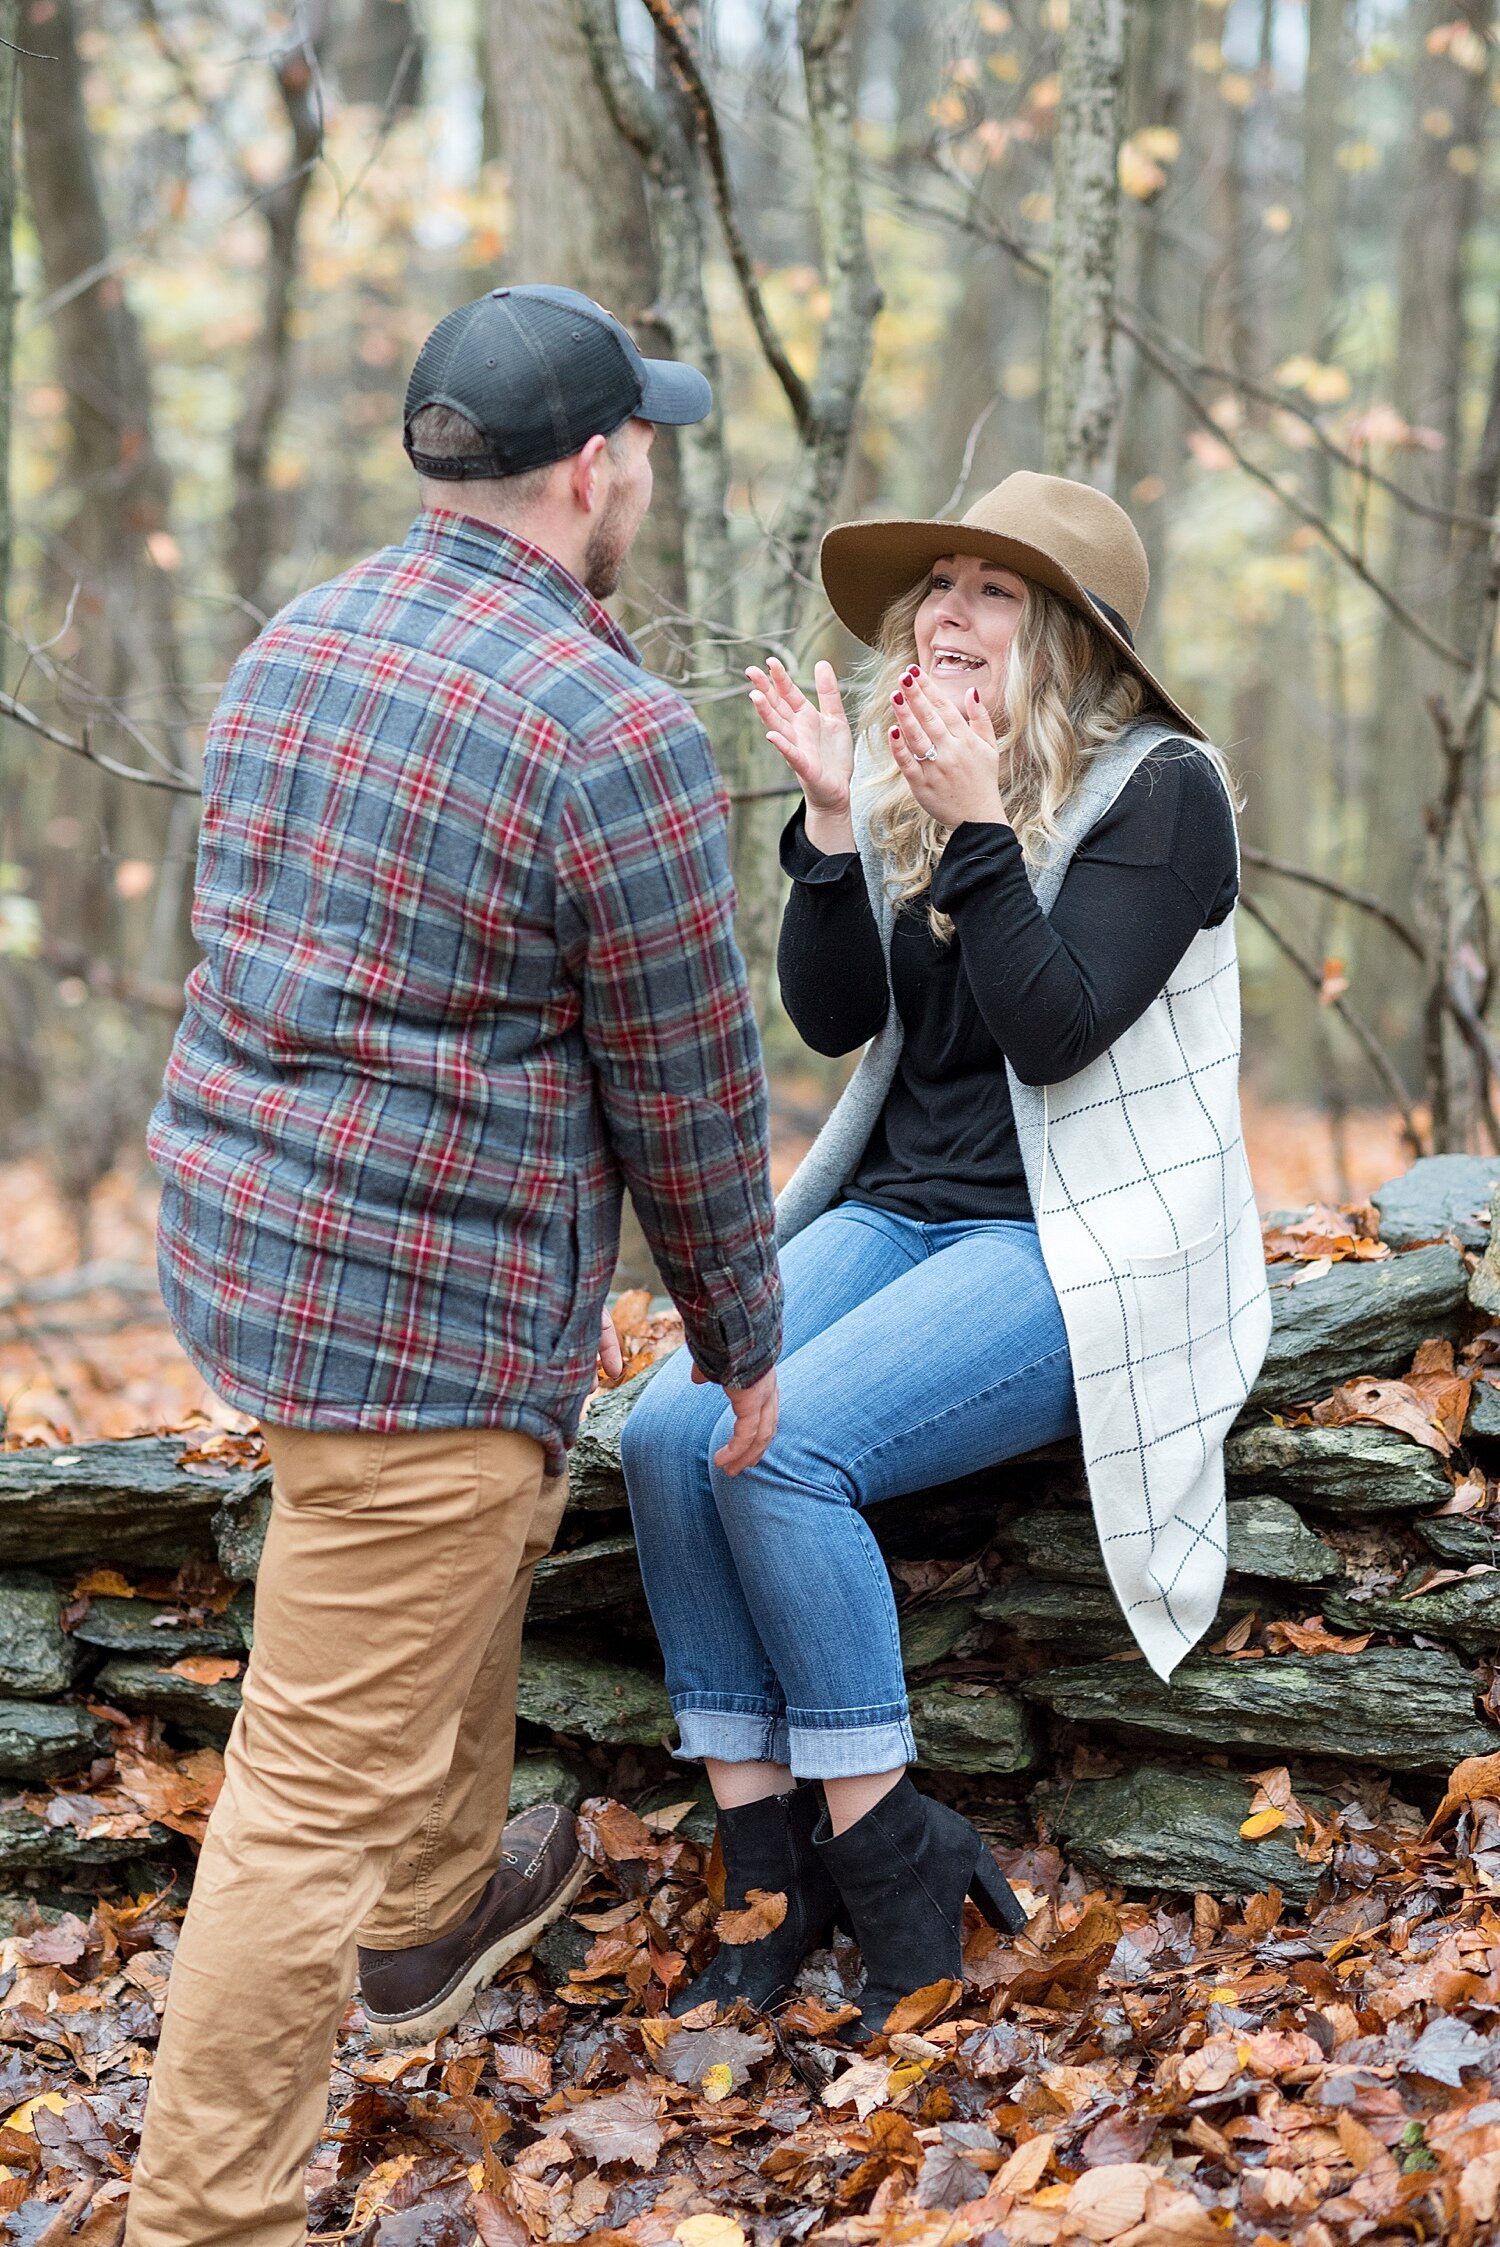 Pinnacle Overlook Holtwood PA Surprise Proposal Photography_8722.jpg